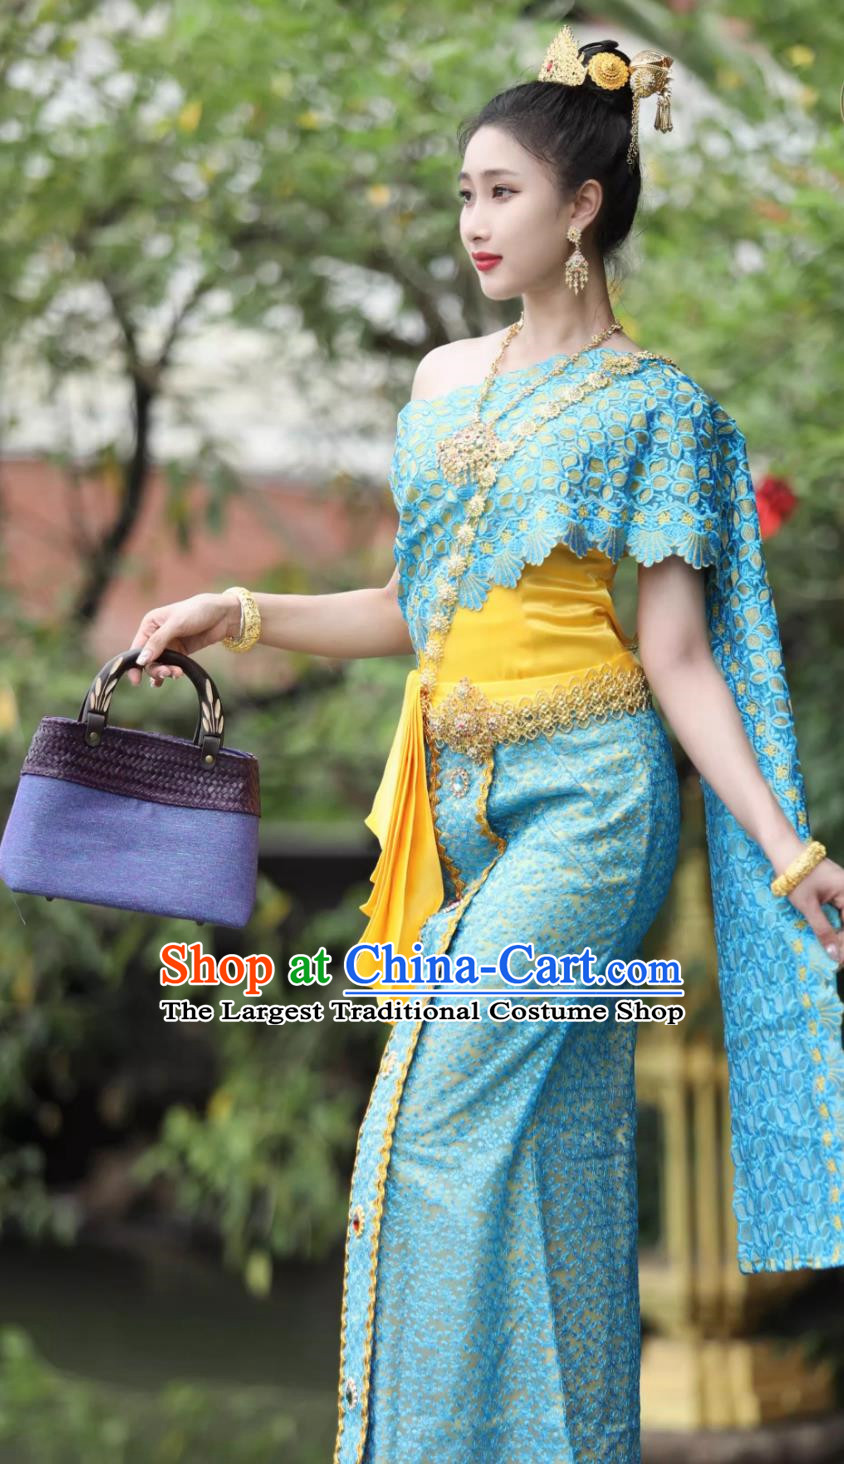 Thai Clothing Women Set Thailand Traditional Embroidered Costume Blue Uniform